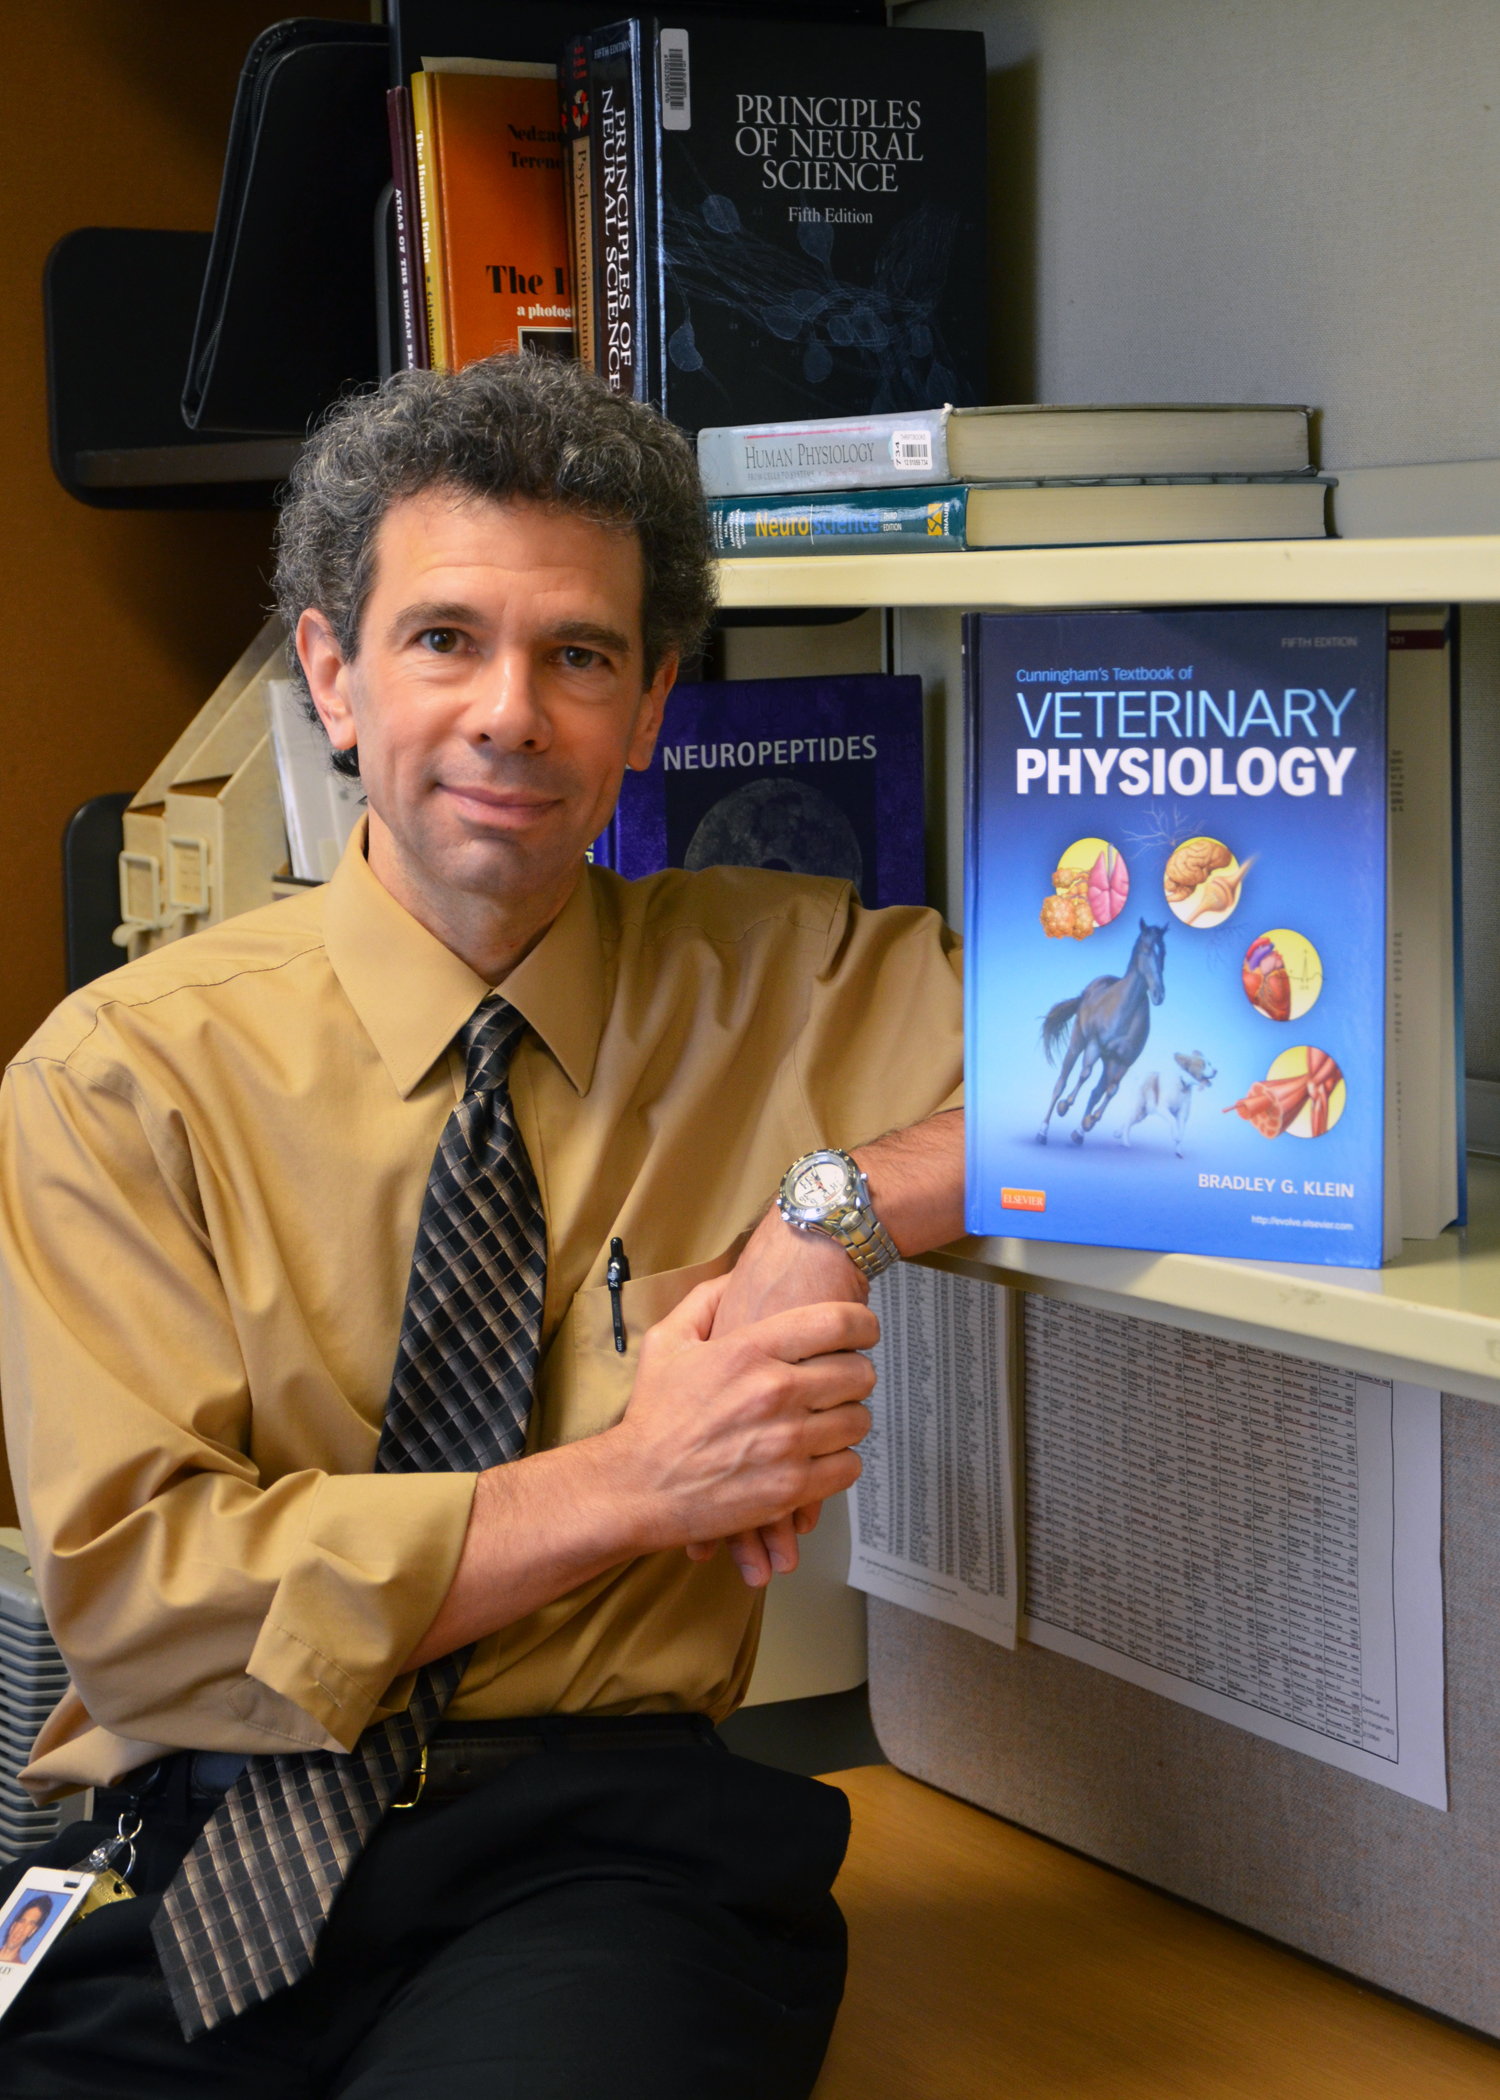 Bradley G. Klein with physiology textbook